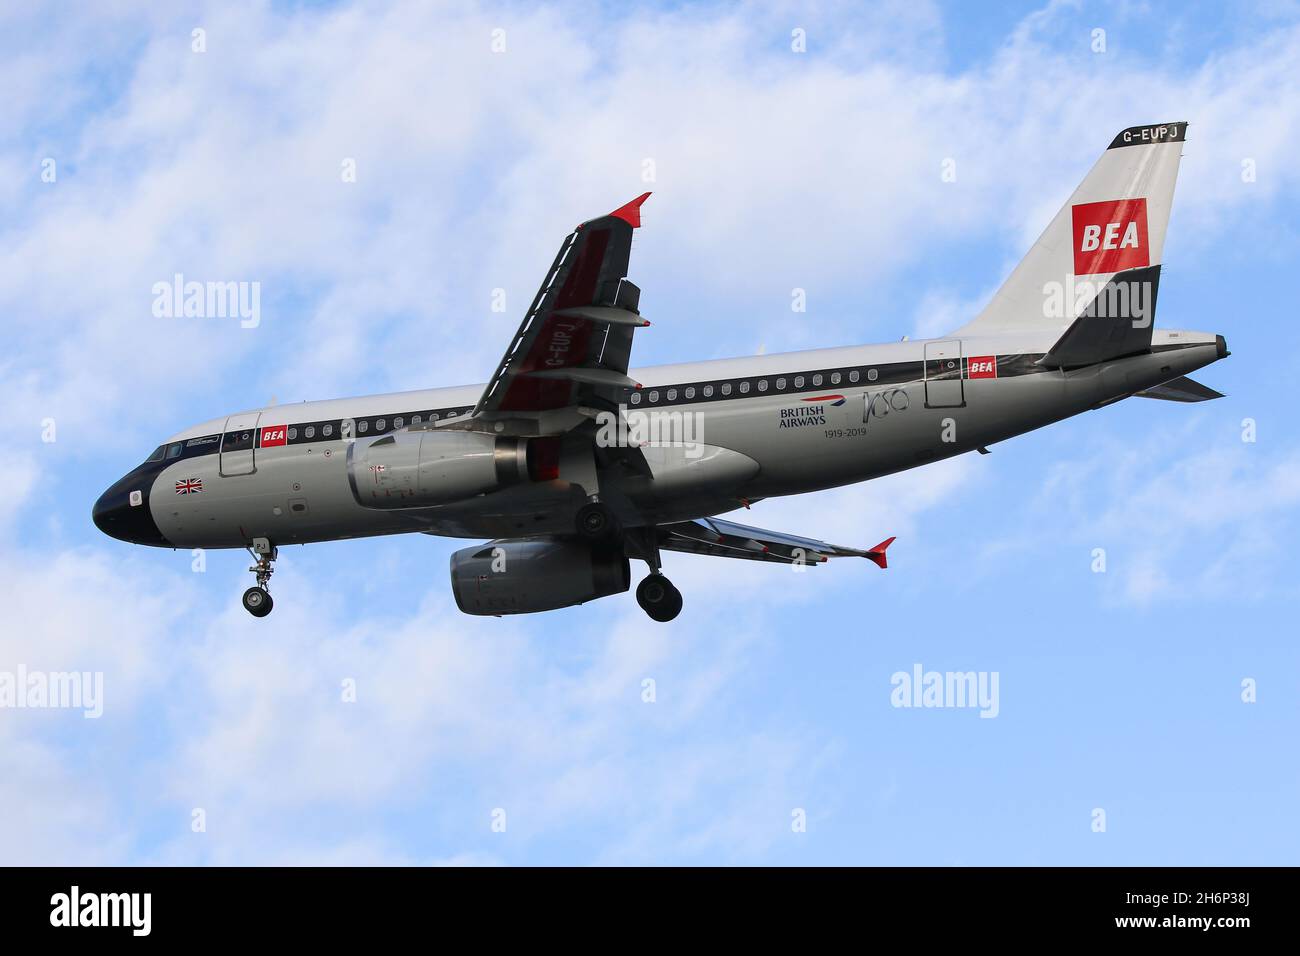 An Airbus A319 flying for British Airways, wearing a special livery celebrating the Airline's centenary, arrives at London Heathrow Airport Stock Photo